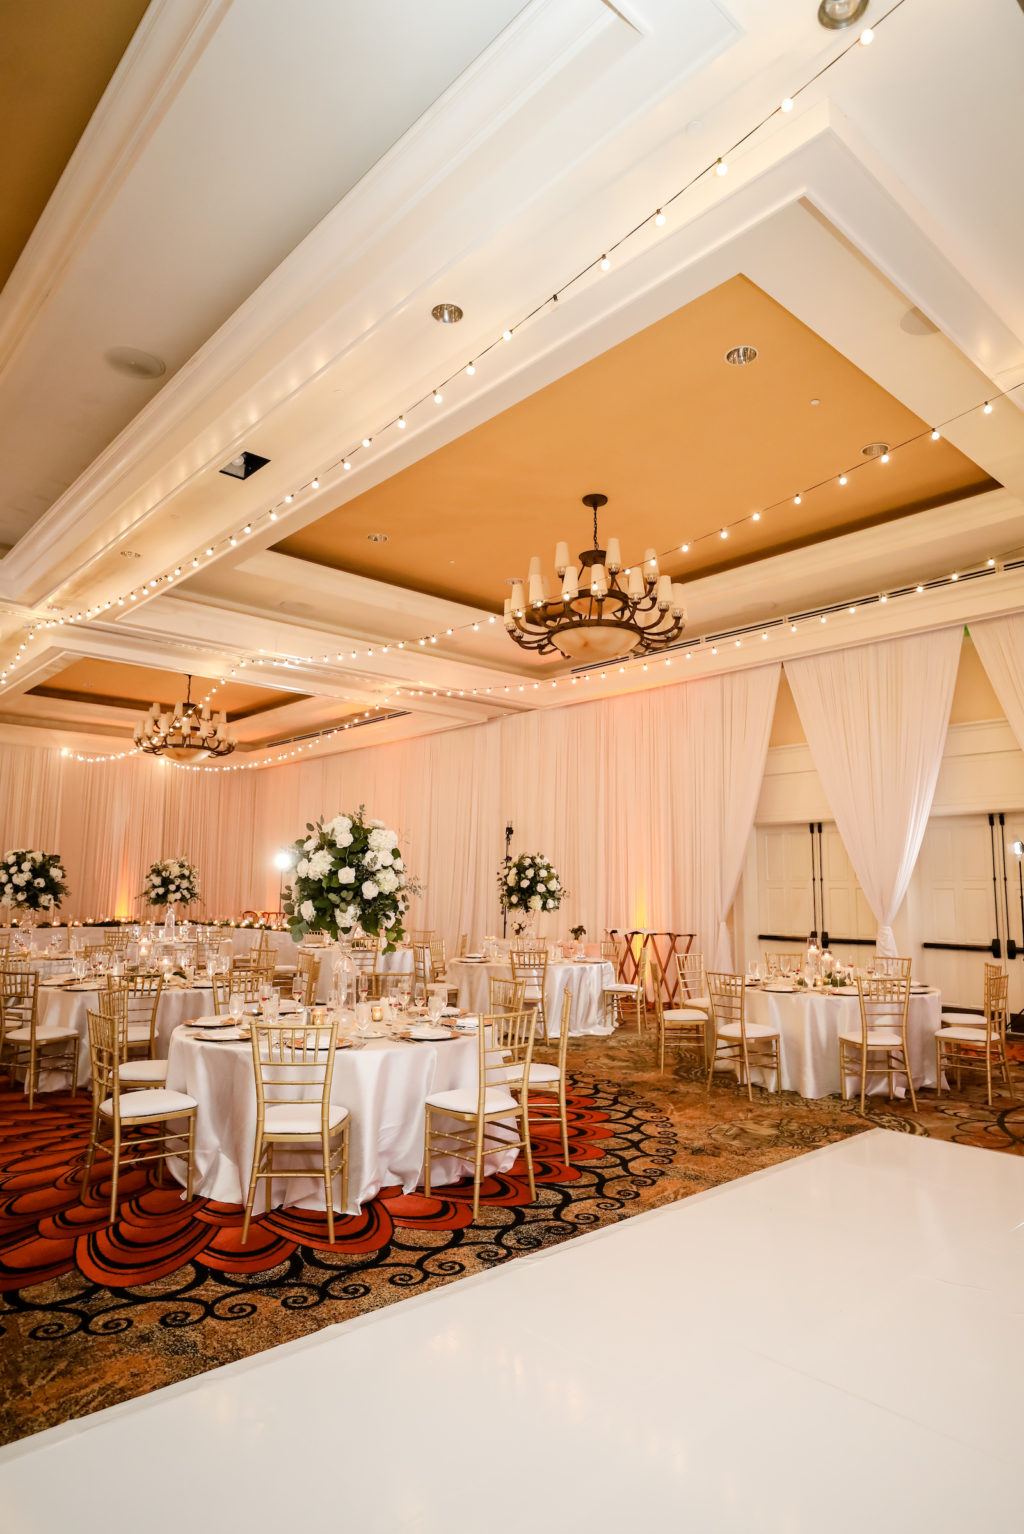 Elegant Timeless Wedding Reception Ballroom Decor, String Lights on Ceiling, Gold Chiavari Chairs, Tall White and Greenery Floral Centerpieces | Tampa Bay Wedding Photographer Lifelong Photography Studio | Clearwater Beach Wedding Venue Sandpearl Resort | Wedding Planner Blue Skies Weddings and Events | Wedding Florist Iza's Flowers